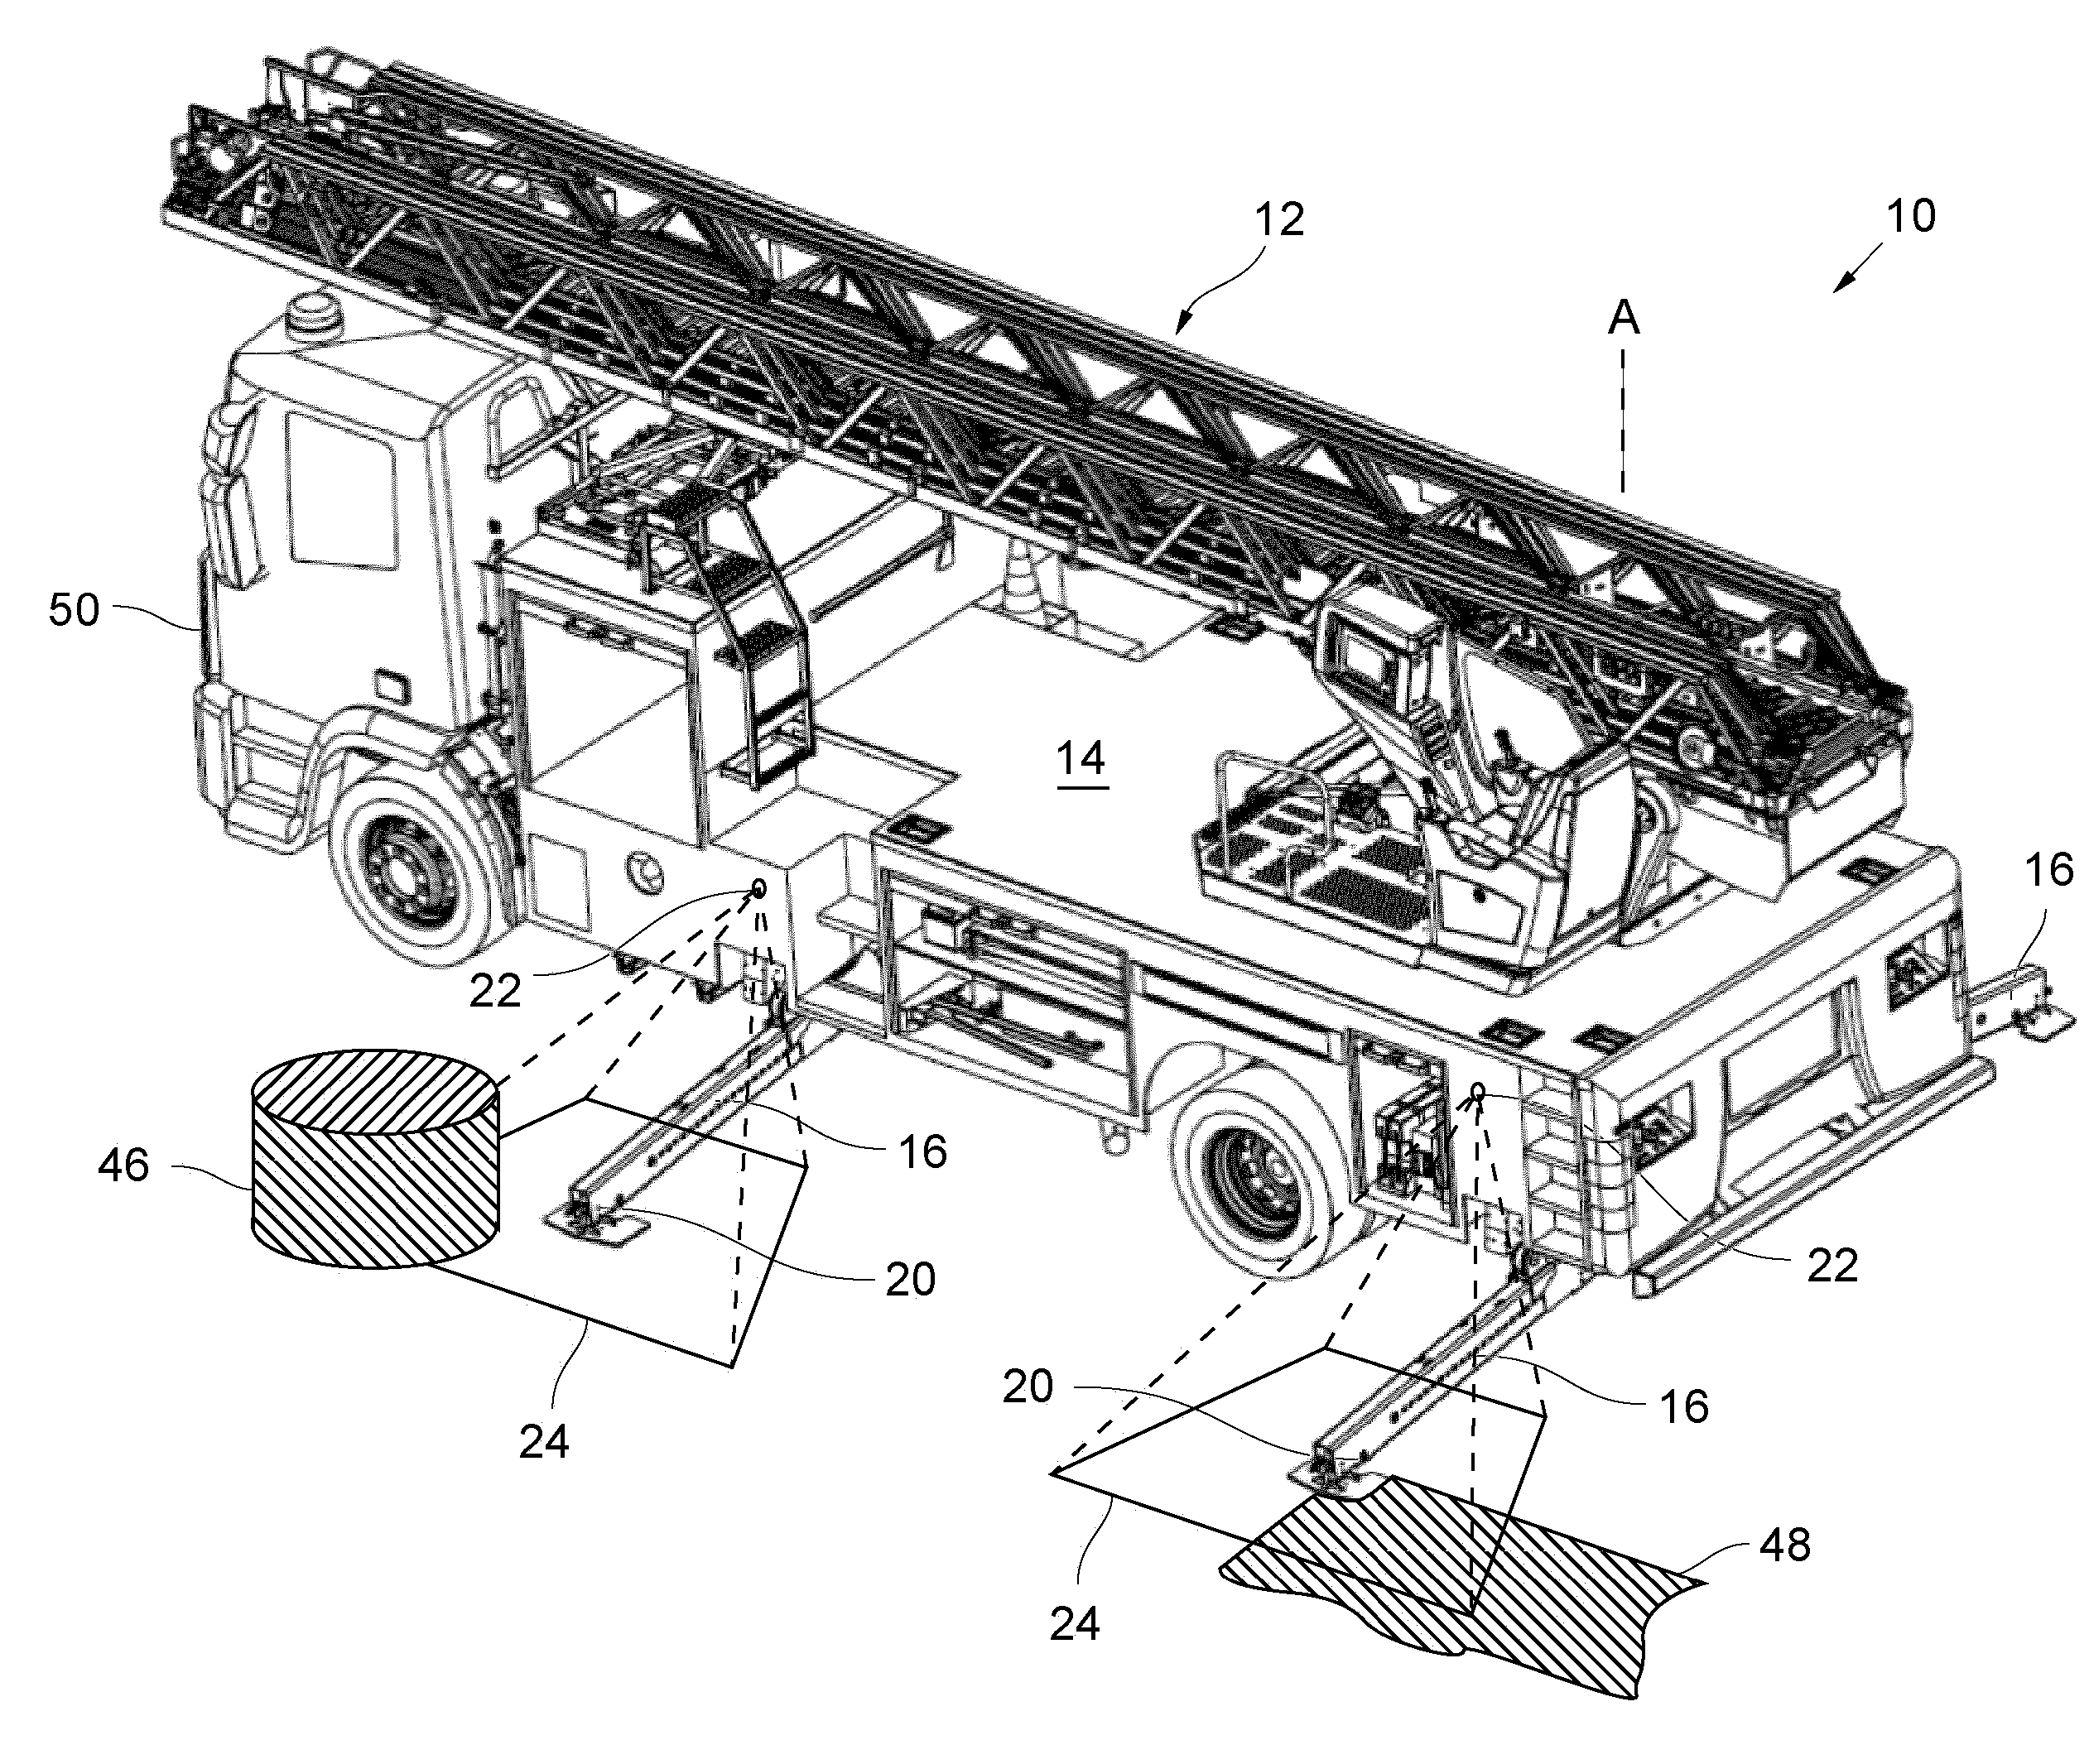 Utility vehicle with monitoring system for monitoring the position of the vehicle